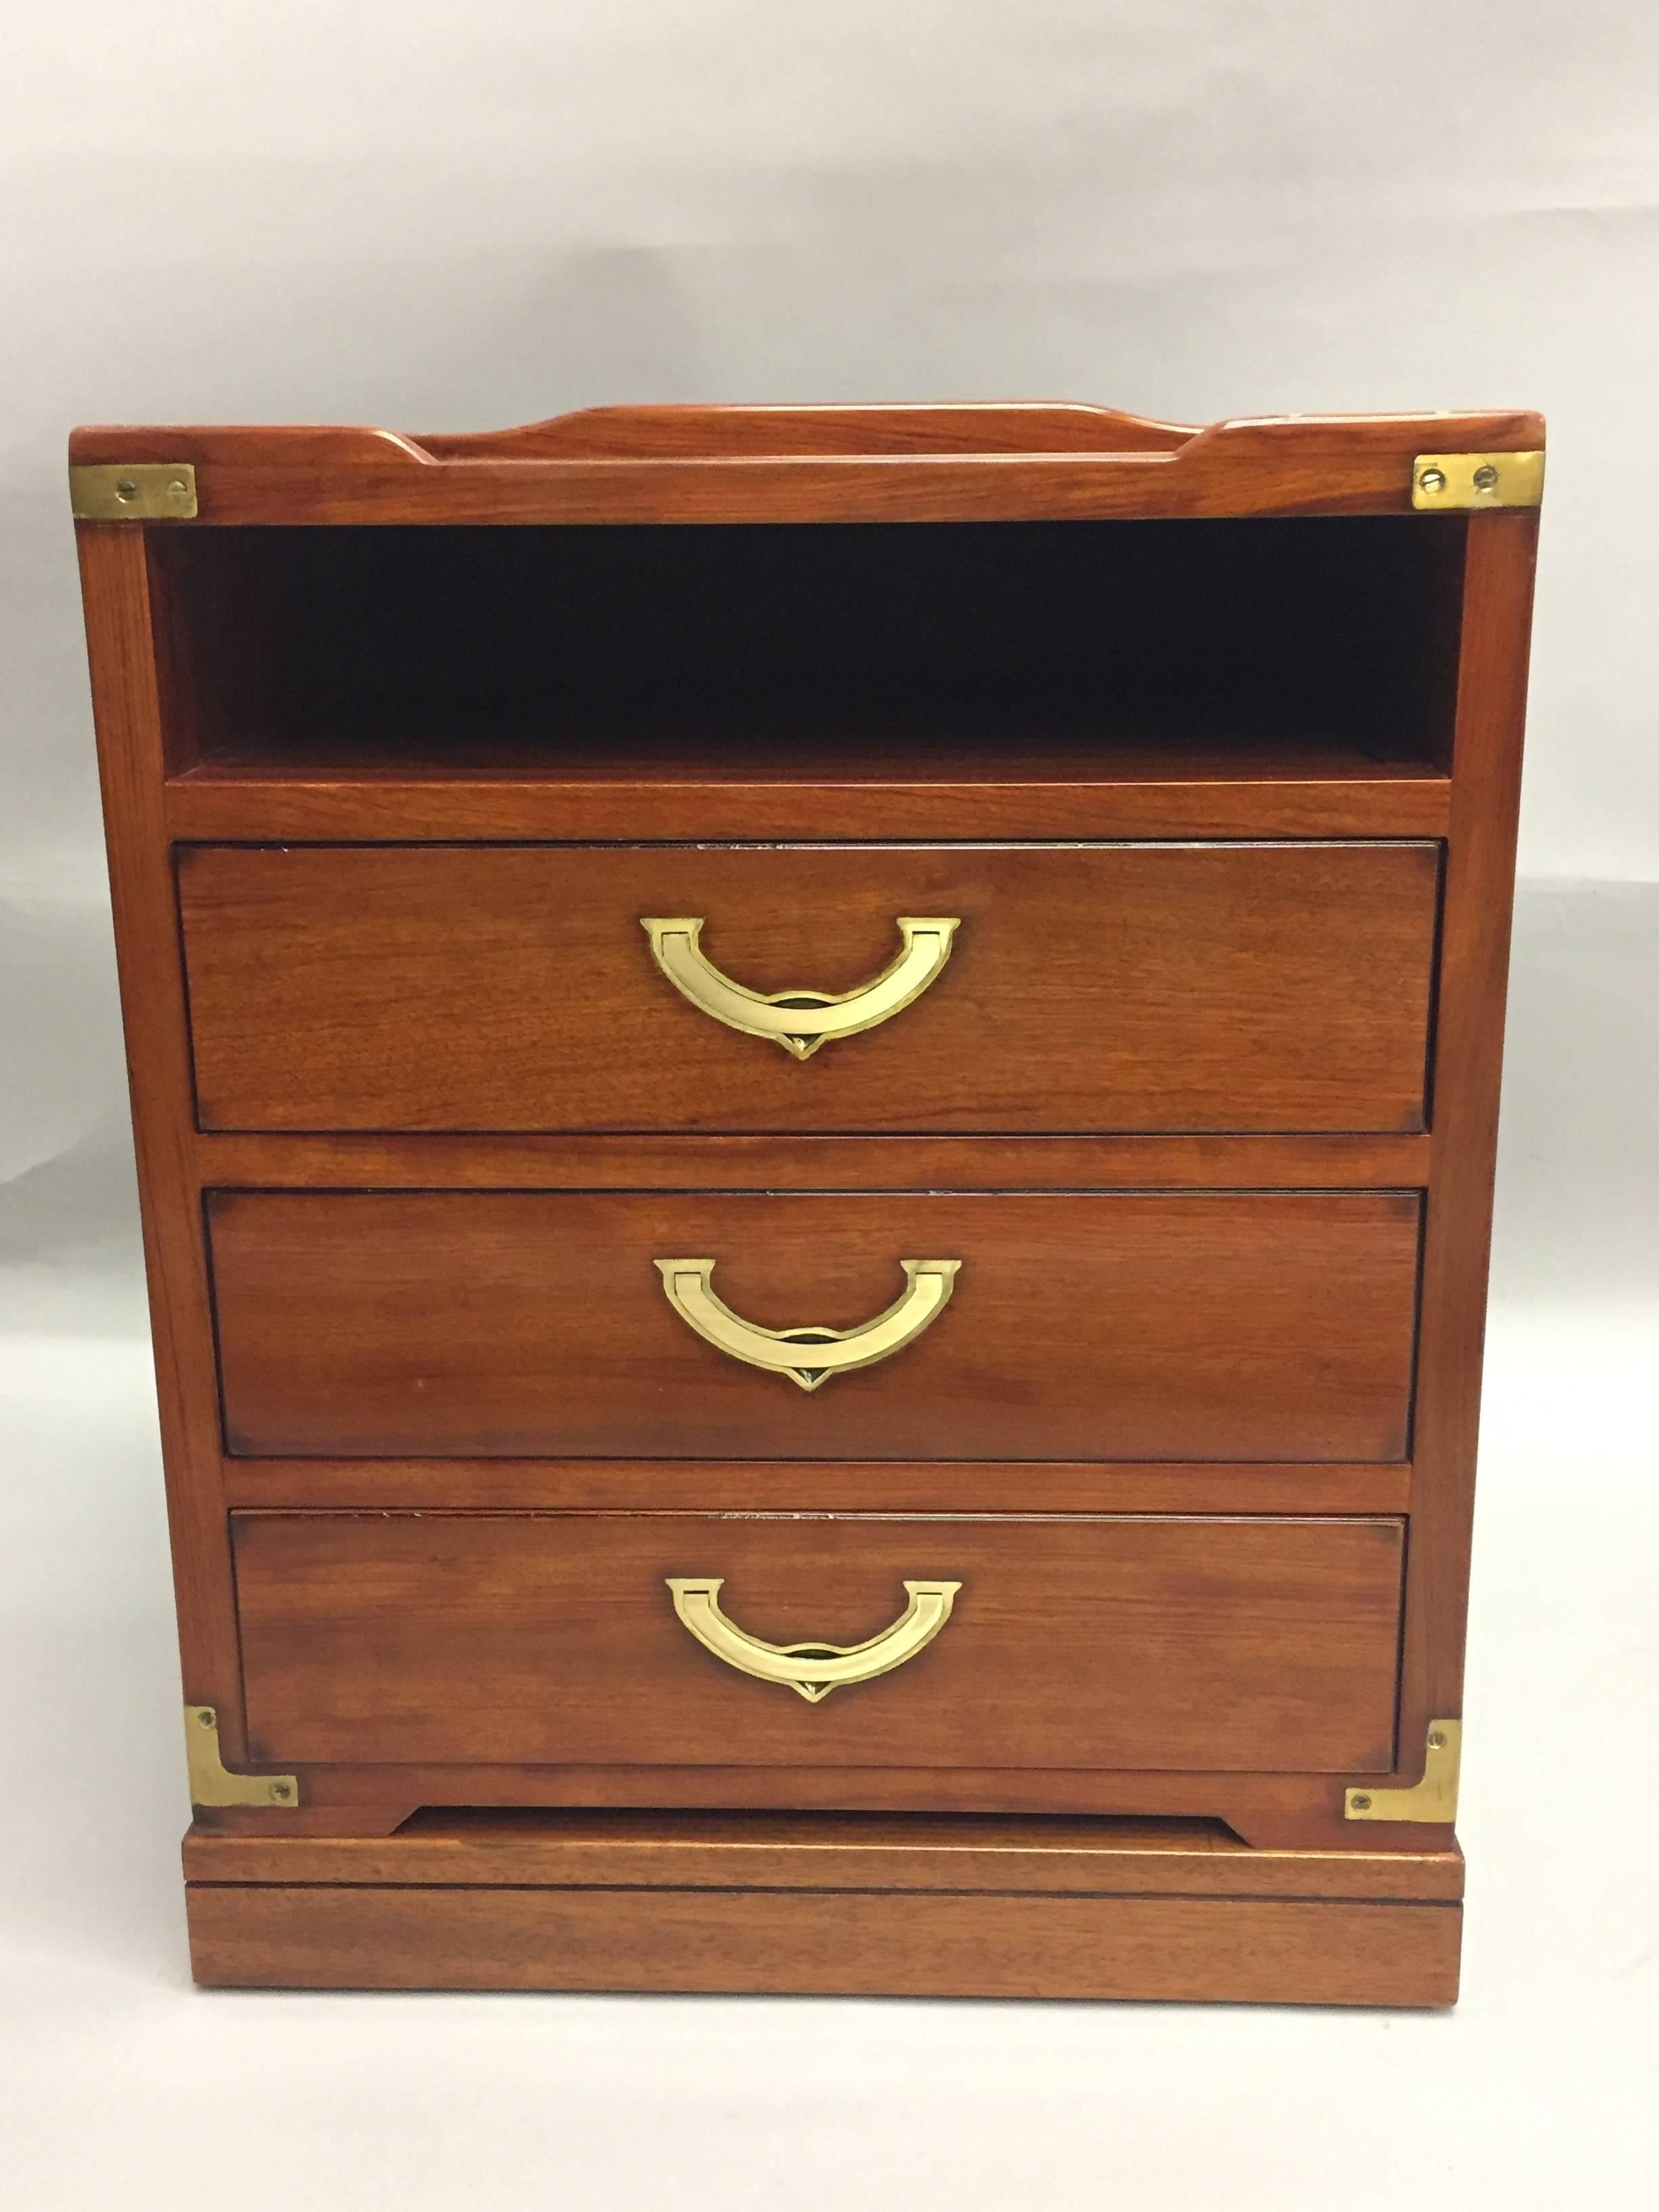 Two handsome mahogany and brass nightstands having three drawers and an open area under the top for storage that make them like little commodes. Original brass hardware and lovely dark inlay around the top. Created by Starbay, a company that